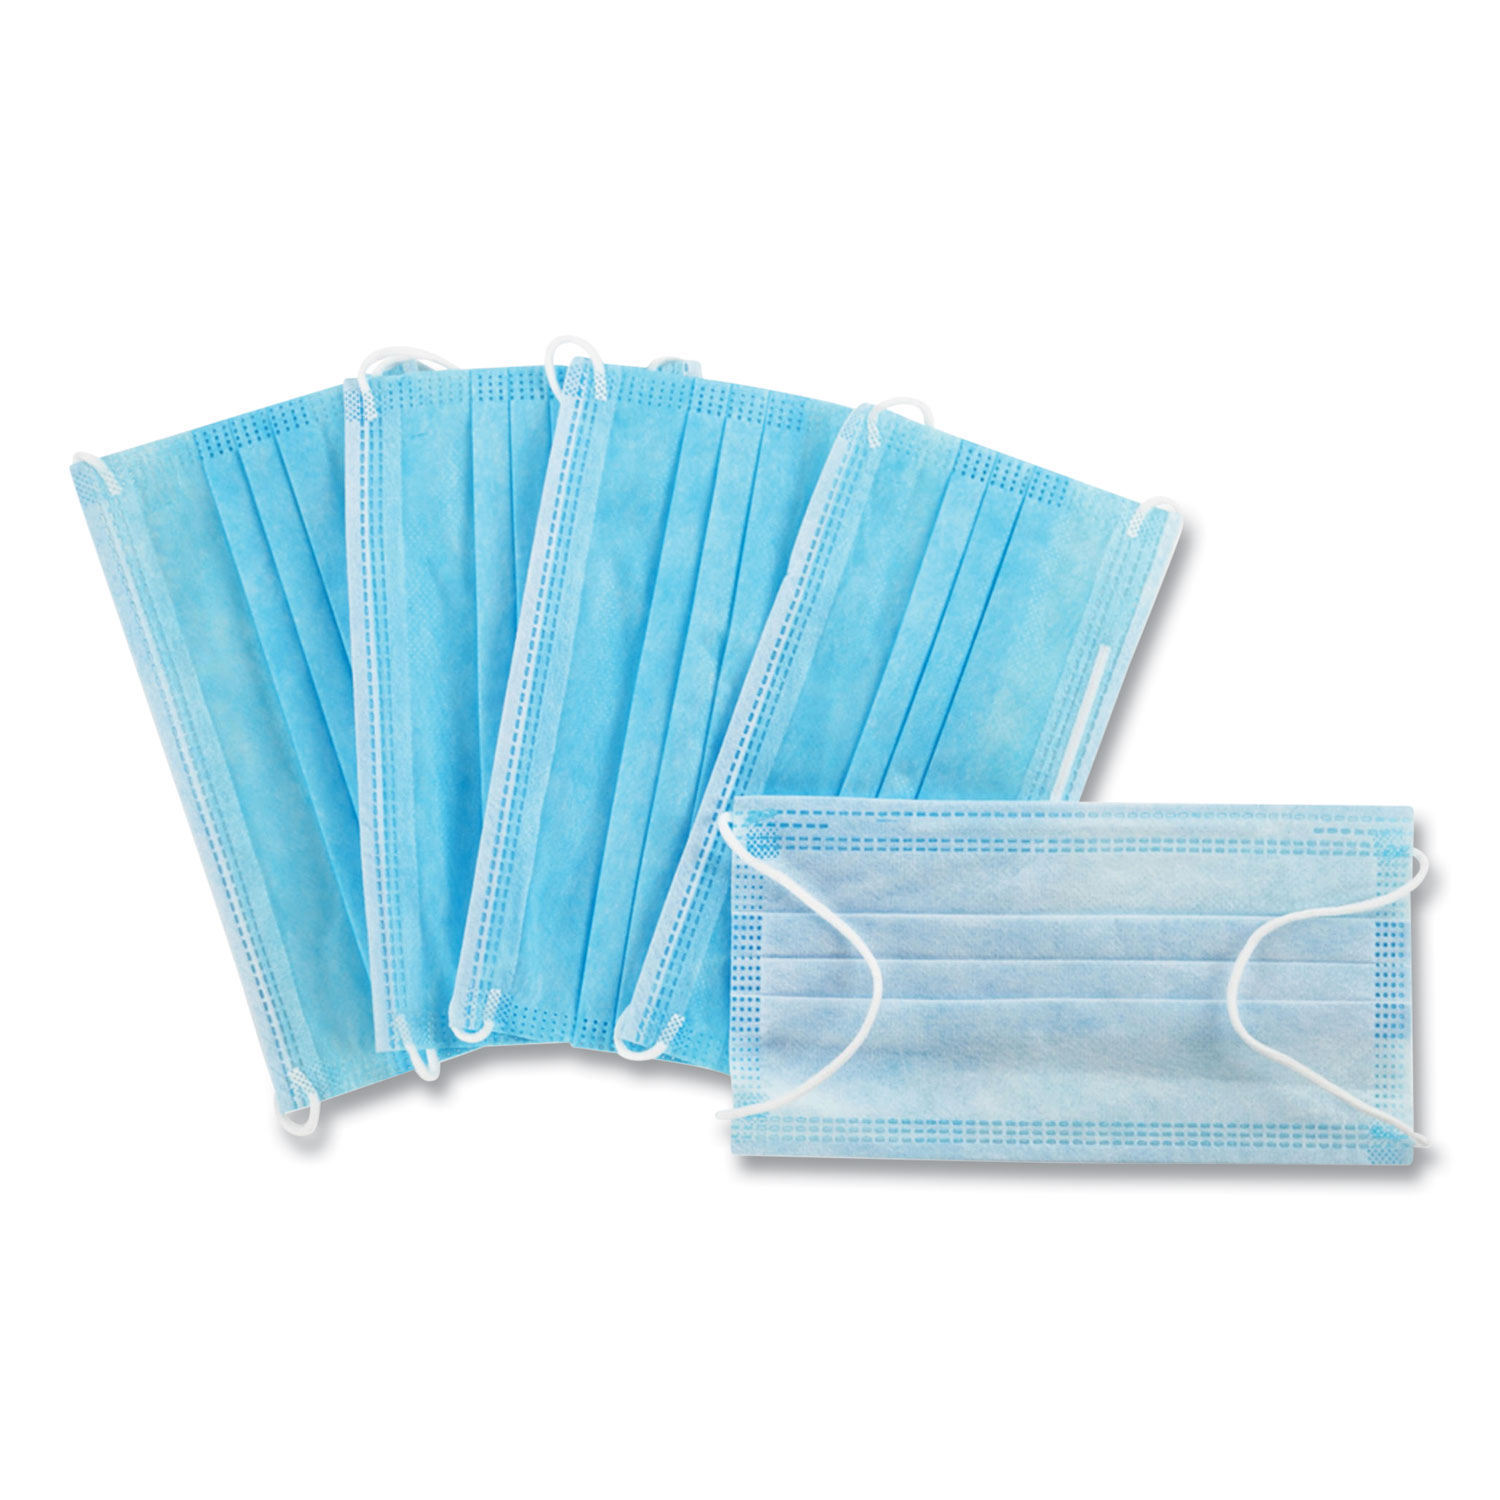  GN1 MM005 MM005 Disposable General Use Mask, Blue, 2,000/Carton (GN1MM005) 